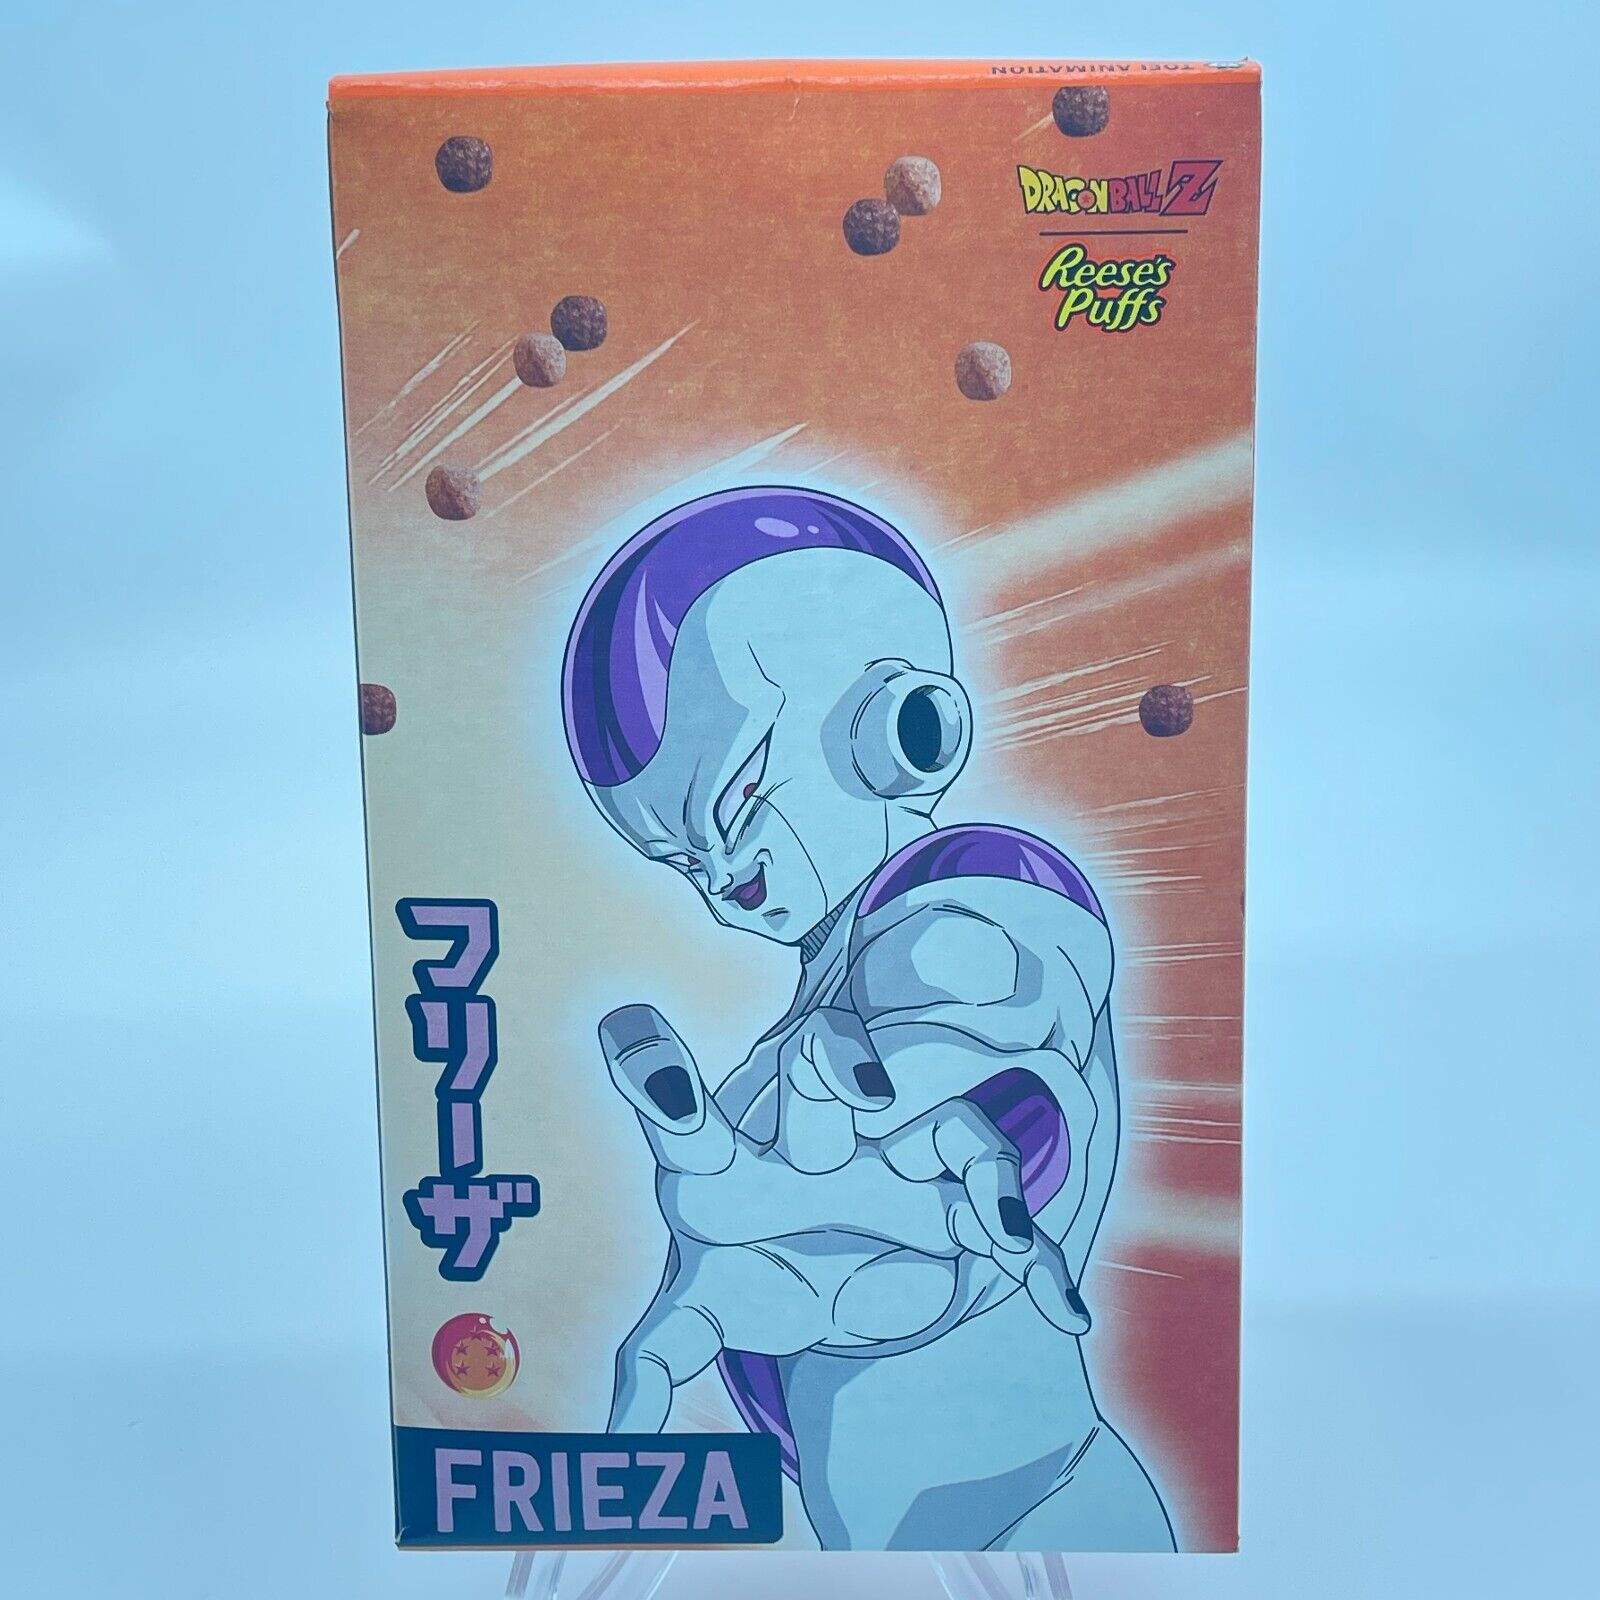 New Limited Edition Family Size Reese’s Puffs Dragonball Z Cereal Frieza 19.7oz